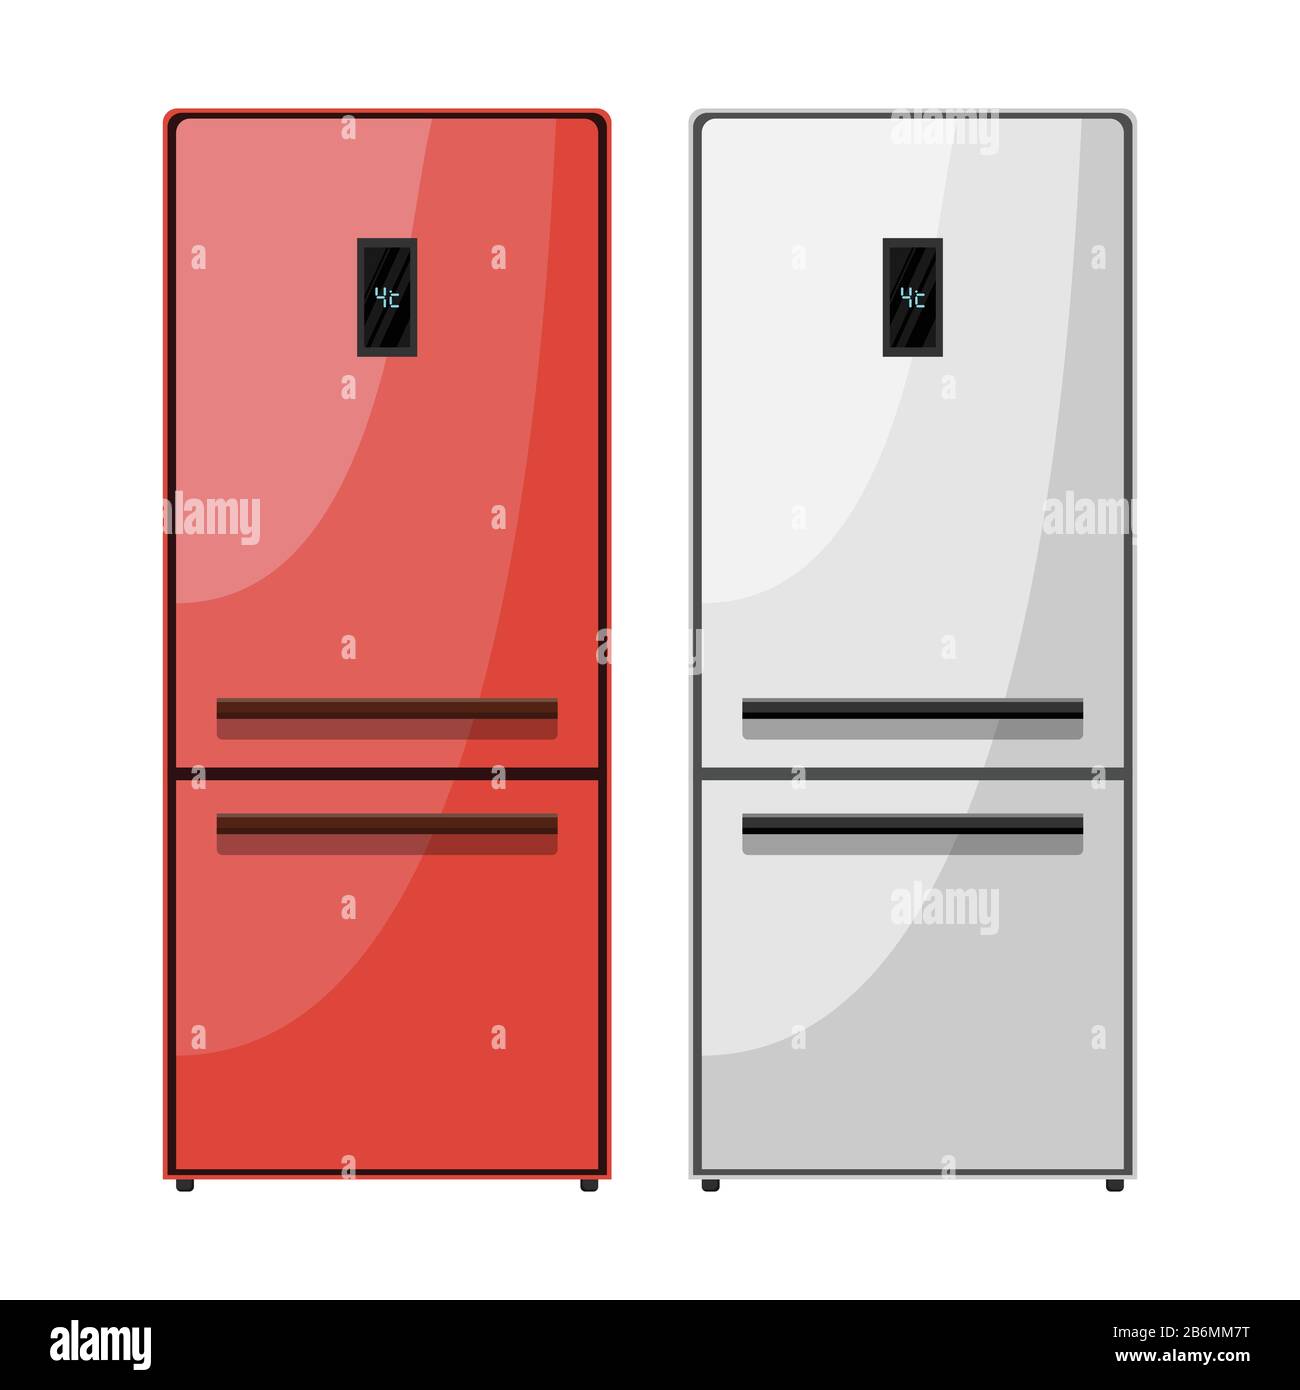 Red and grey kitchen fridges with digital display . Vector illustration Stock Vector